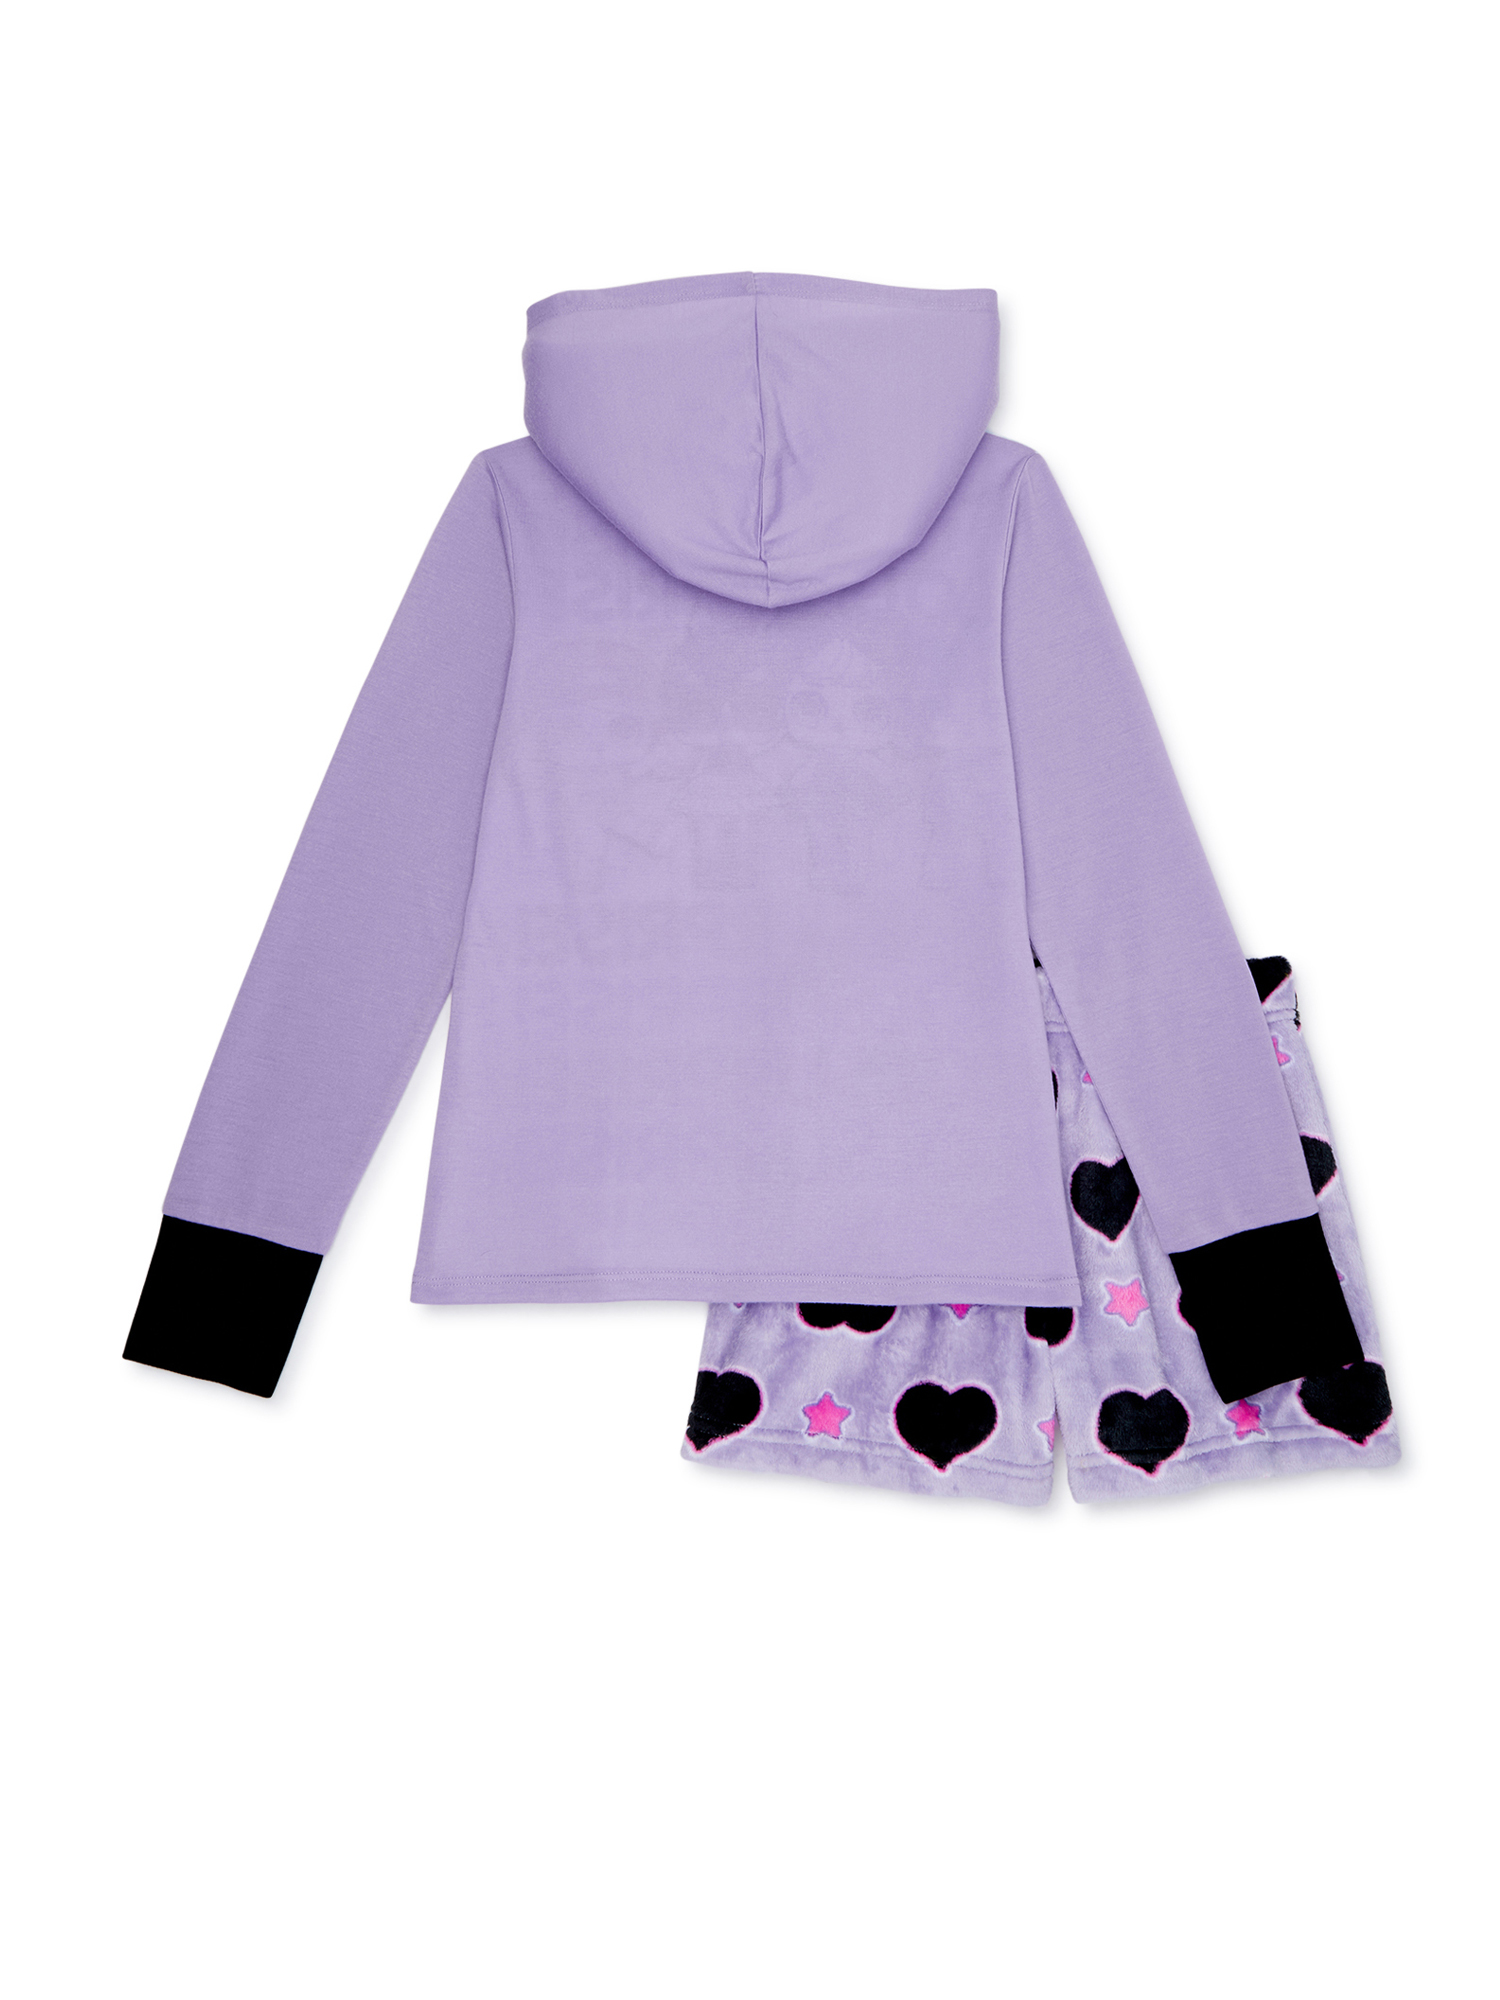 L.O.L Surprise! Girls Pajama with Cozy Plush Shorts & Slippers, Sizes 4-12 - image 3 of 3